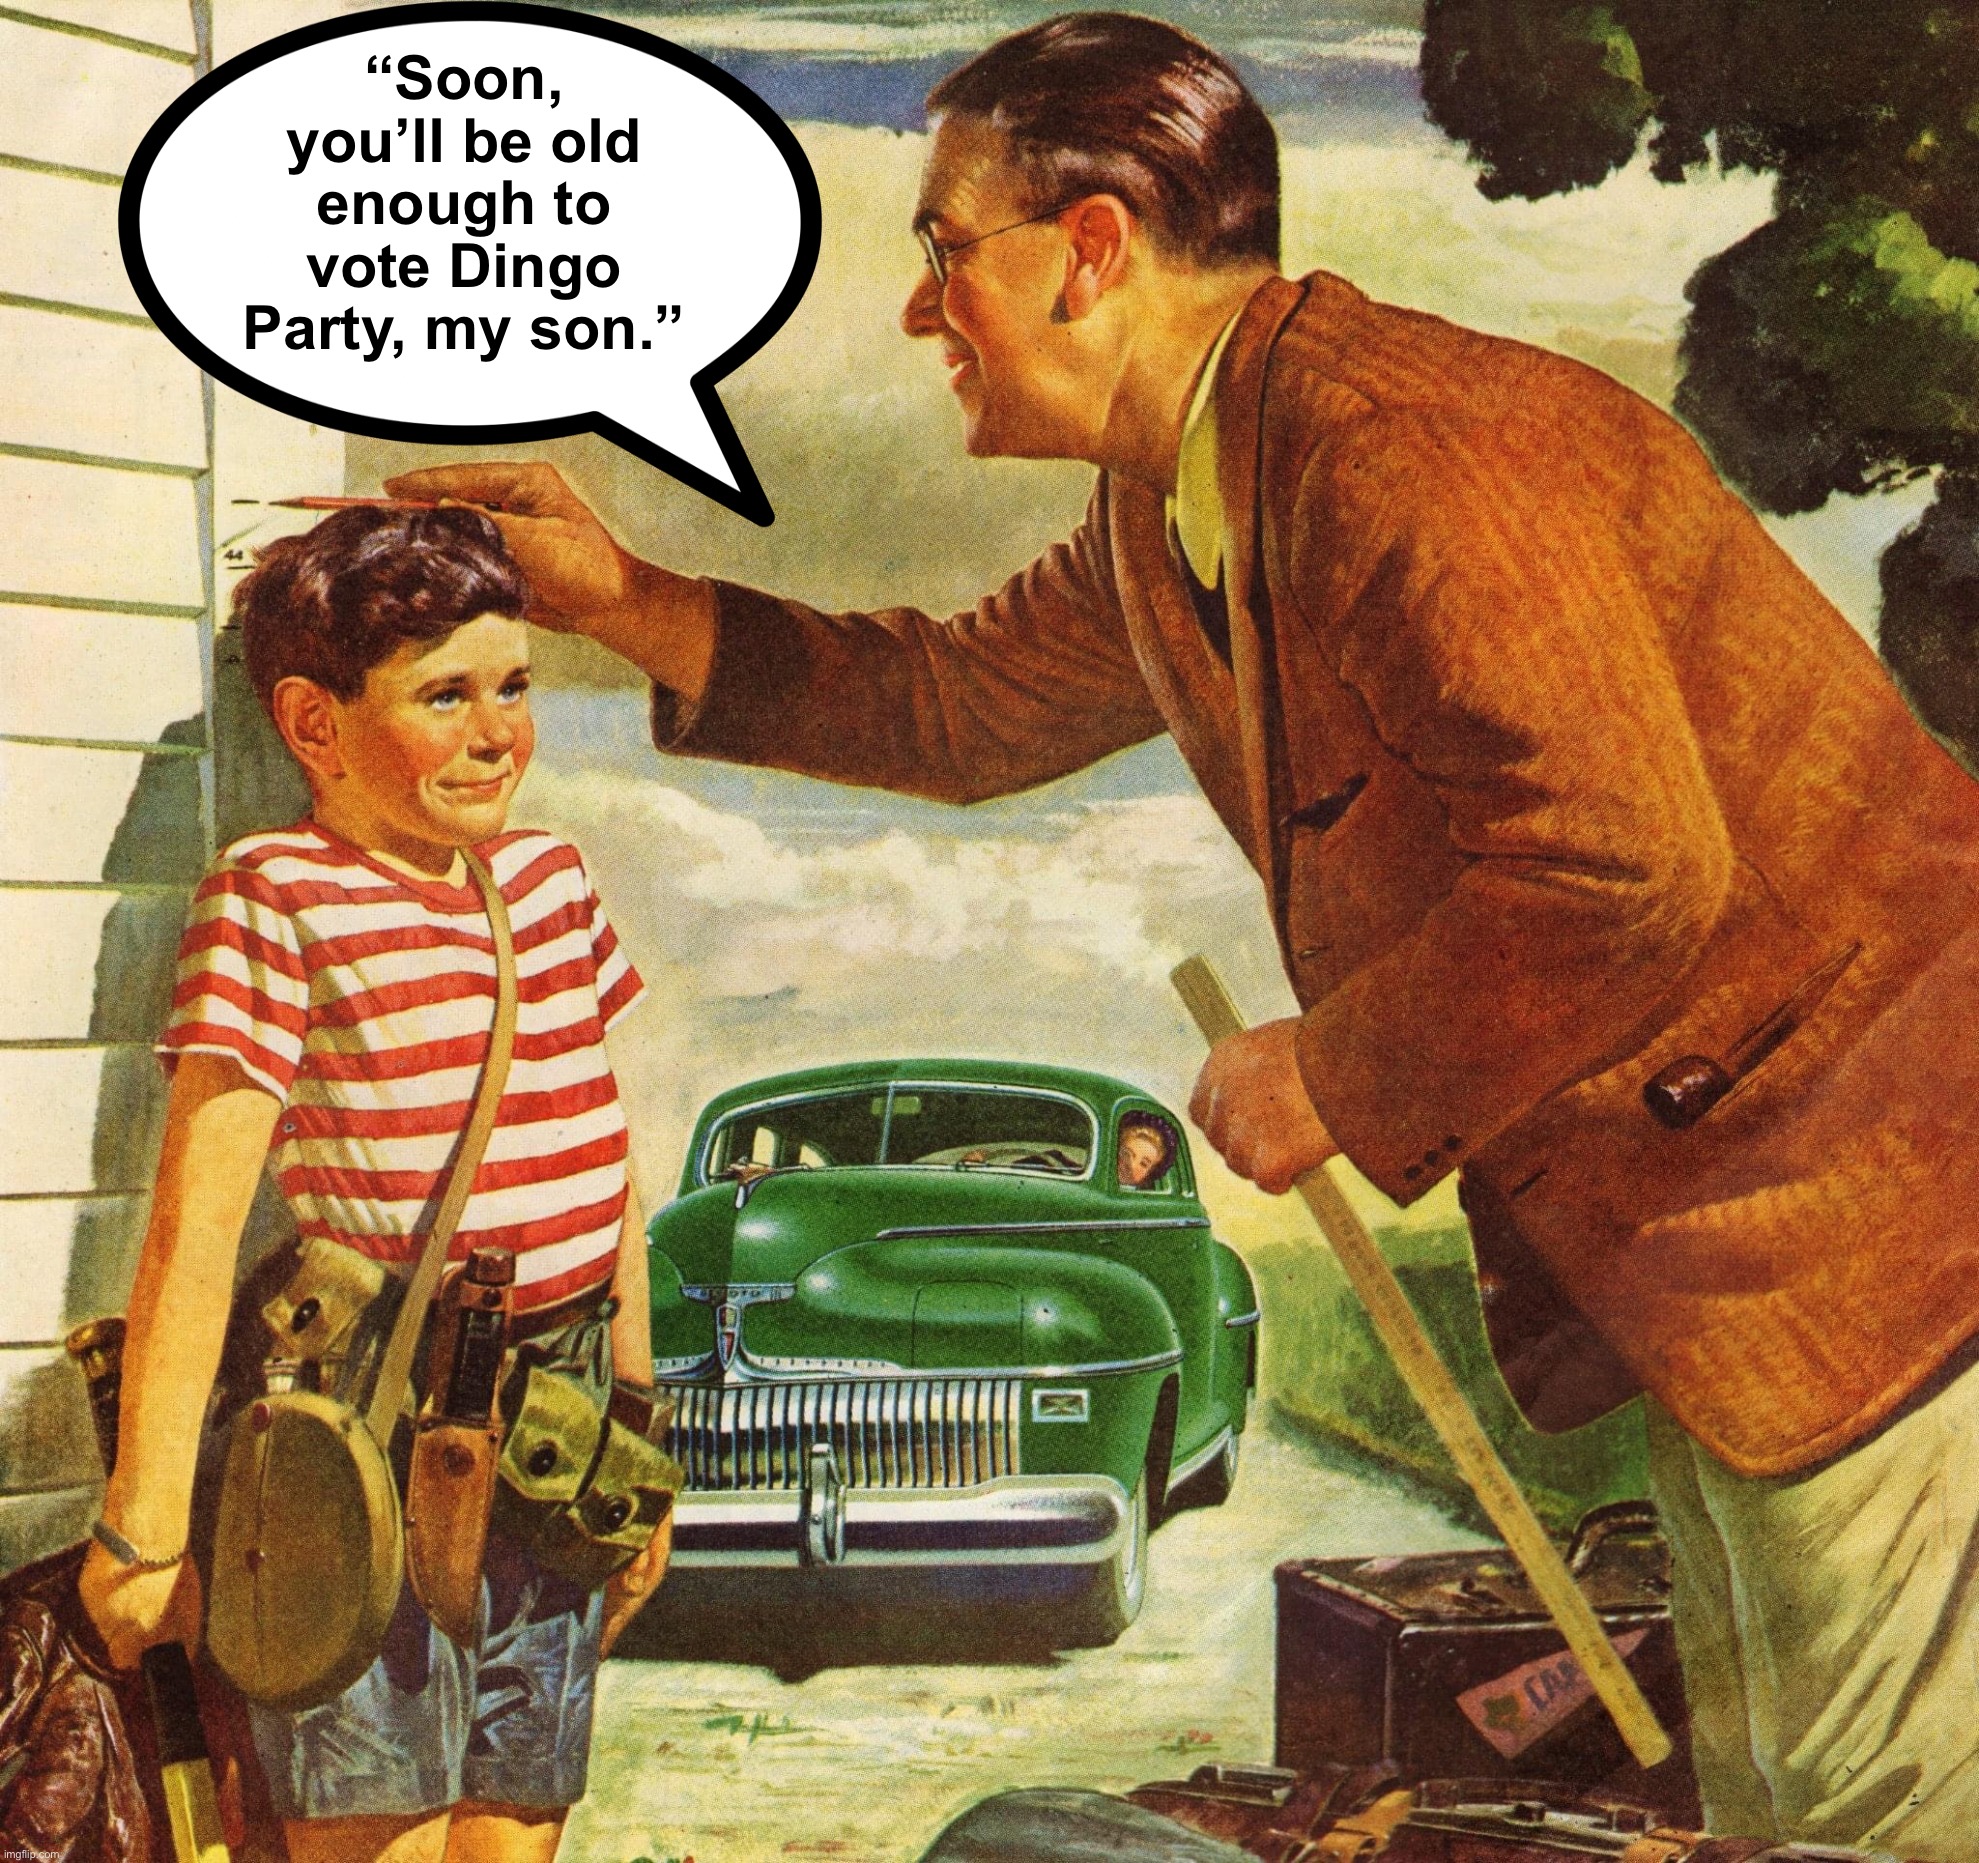 Wholesome indoctrination | “Soon, you’ll be old enough to vote Dingo Party, my son.” | image tagged in curiously offensive vintage ads,wholesome,indoctrination,the way,our founders,intended | made w/ Imgflip meme maker